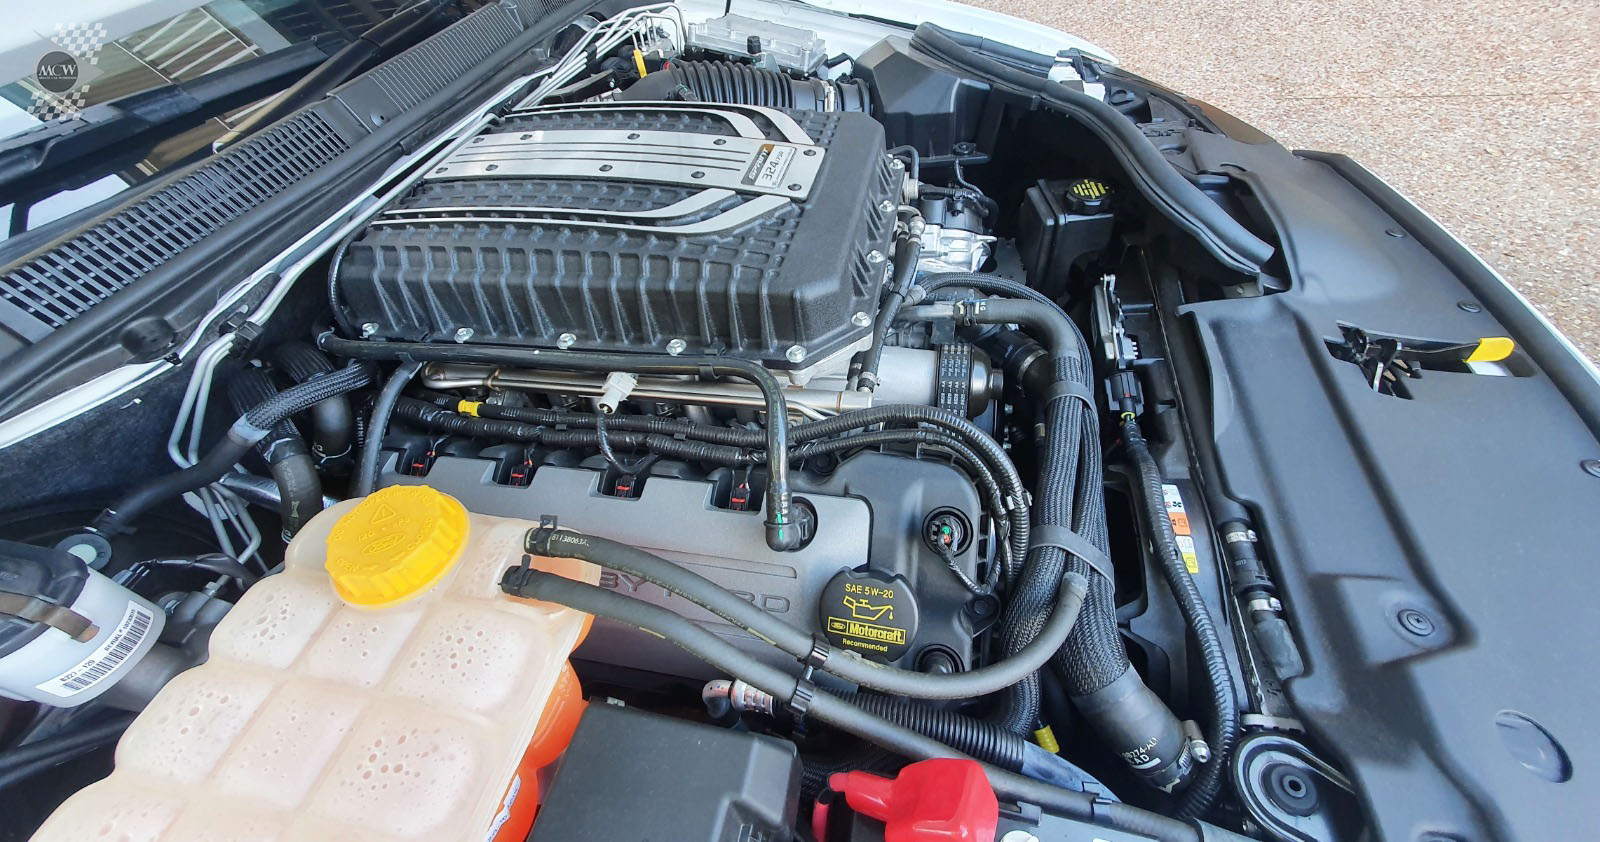 2016 Ford Falcon FGX XR8 Sprint Engine - Muscle Car Warehouse